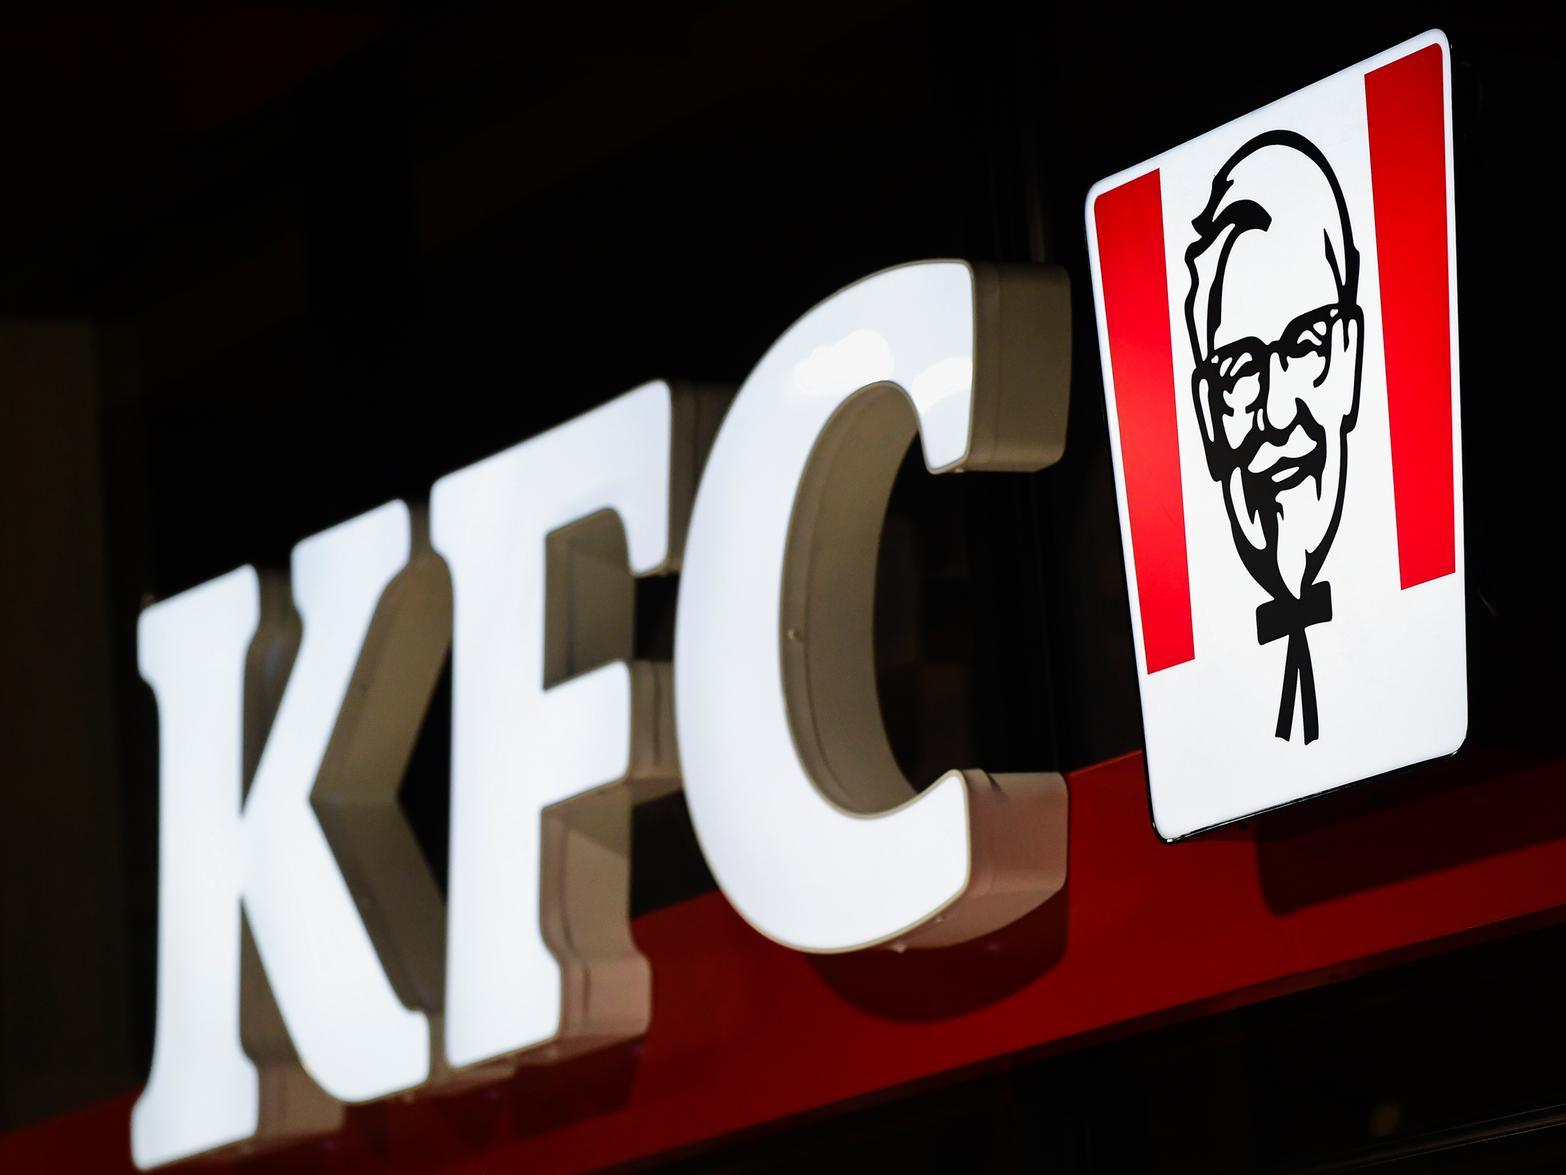 KFC are a dominant force in the fast food industry, and their power shows no signs of wavering. Do you want easier access to the chain's secret recipe?